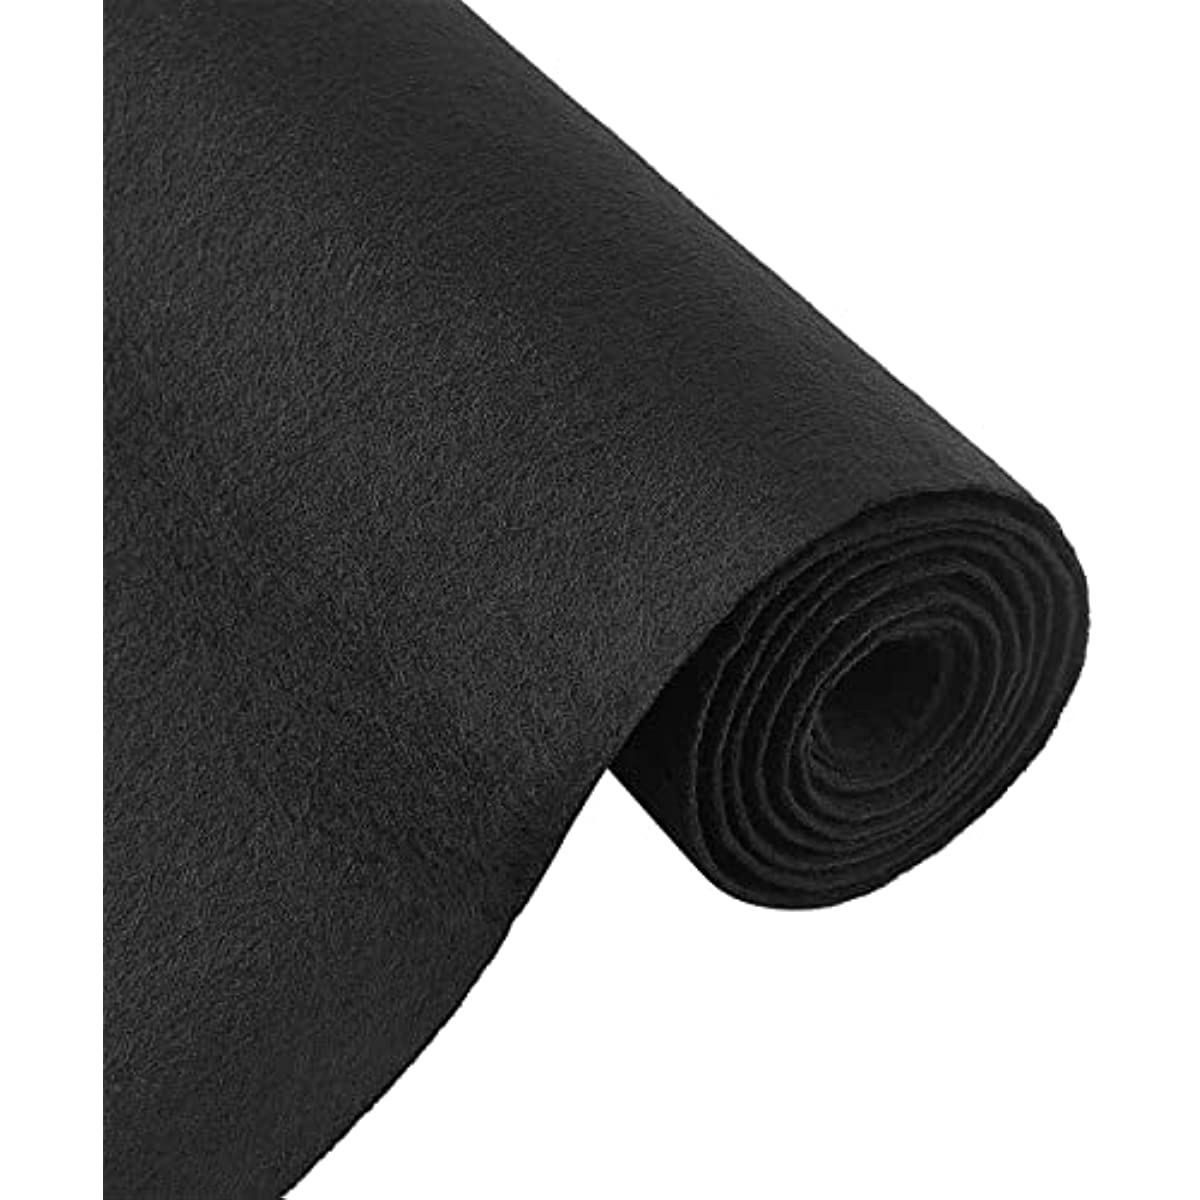 10FT 15.75 Inch Wide Black Felt Roll Craft Felt Nonwoven Fabric  Sheets(0.9mm Thick) Great Felt for Crafts Patchwork Sewing Costumes